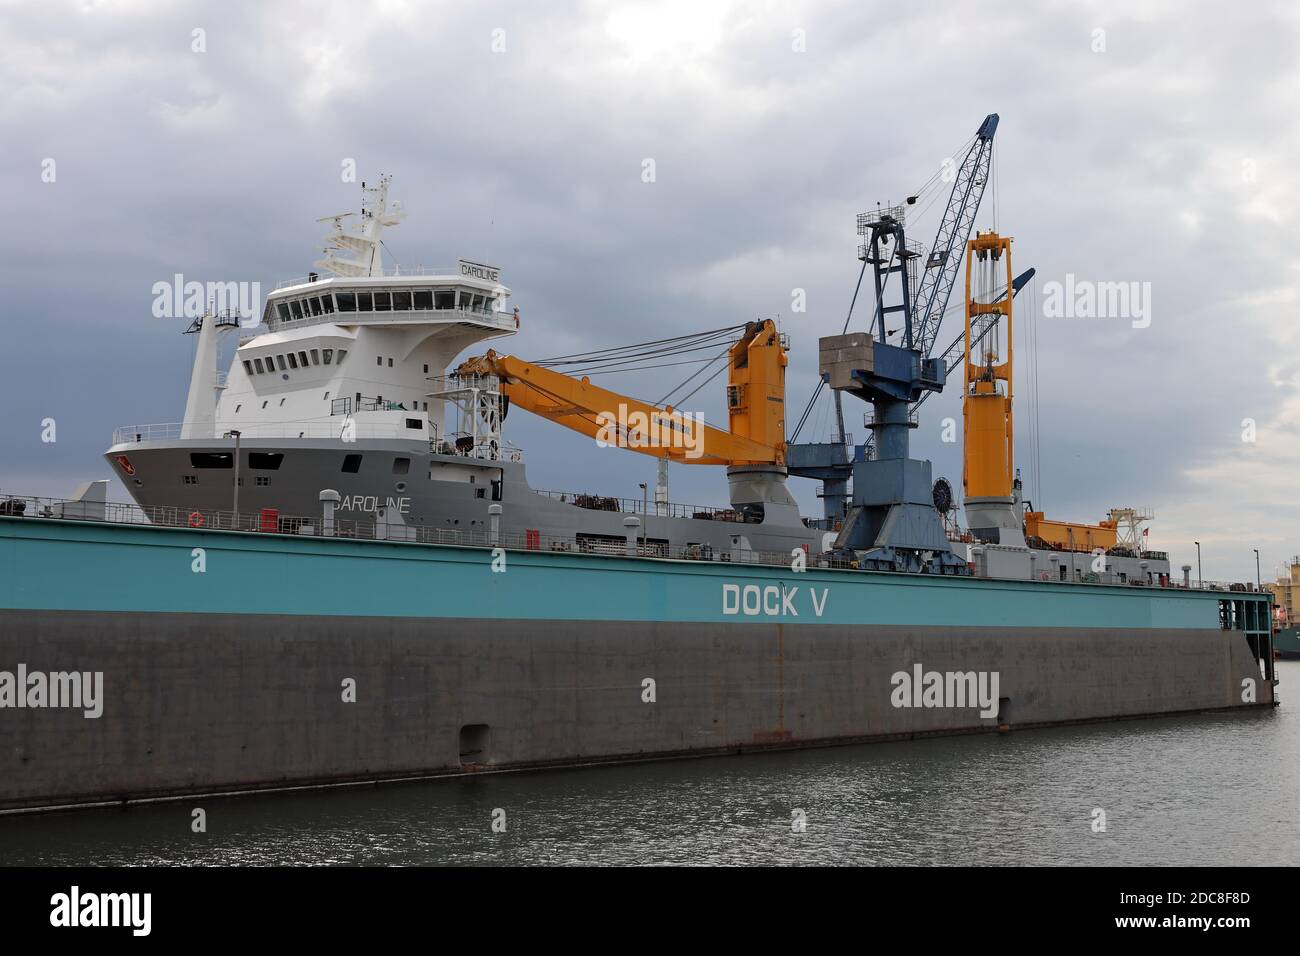 The heavy-duty ship Caroline will be in dry dock in Bremerhaven on August 20, 2020. Stock Photo